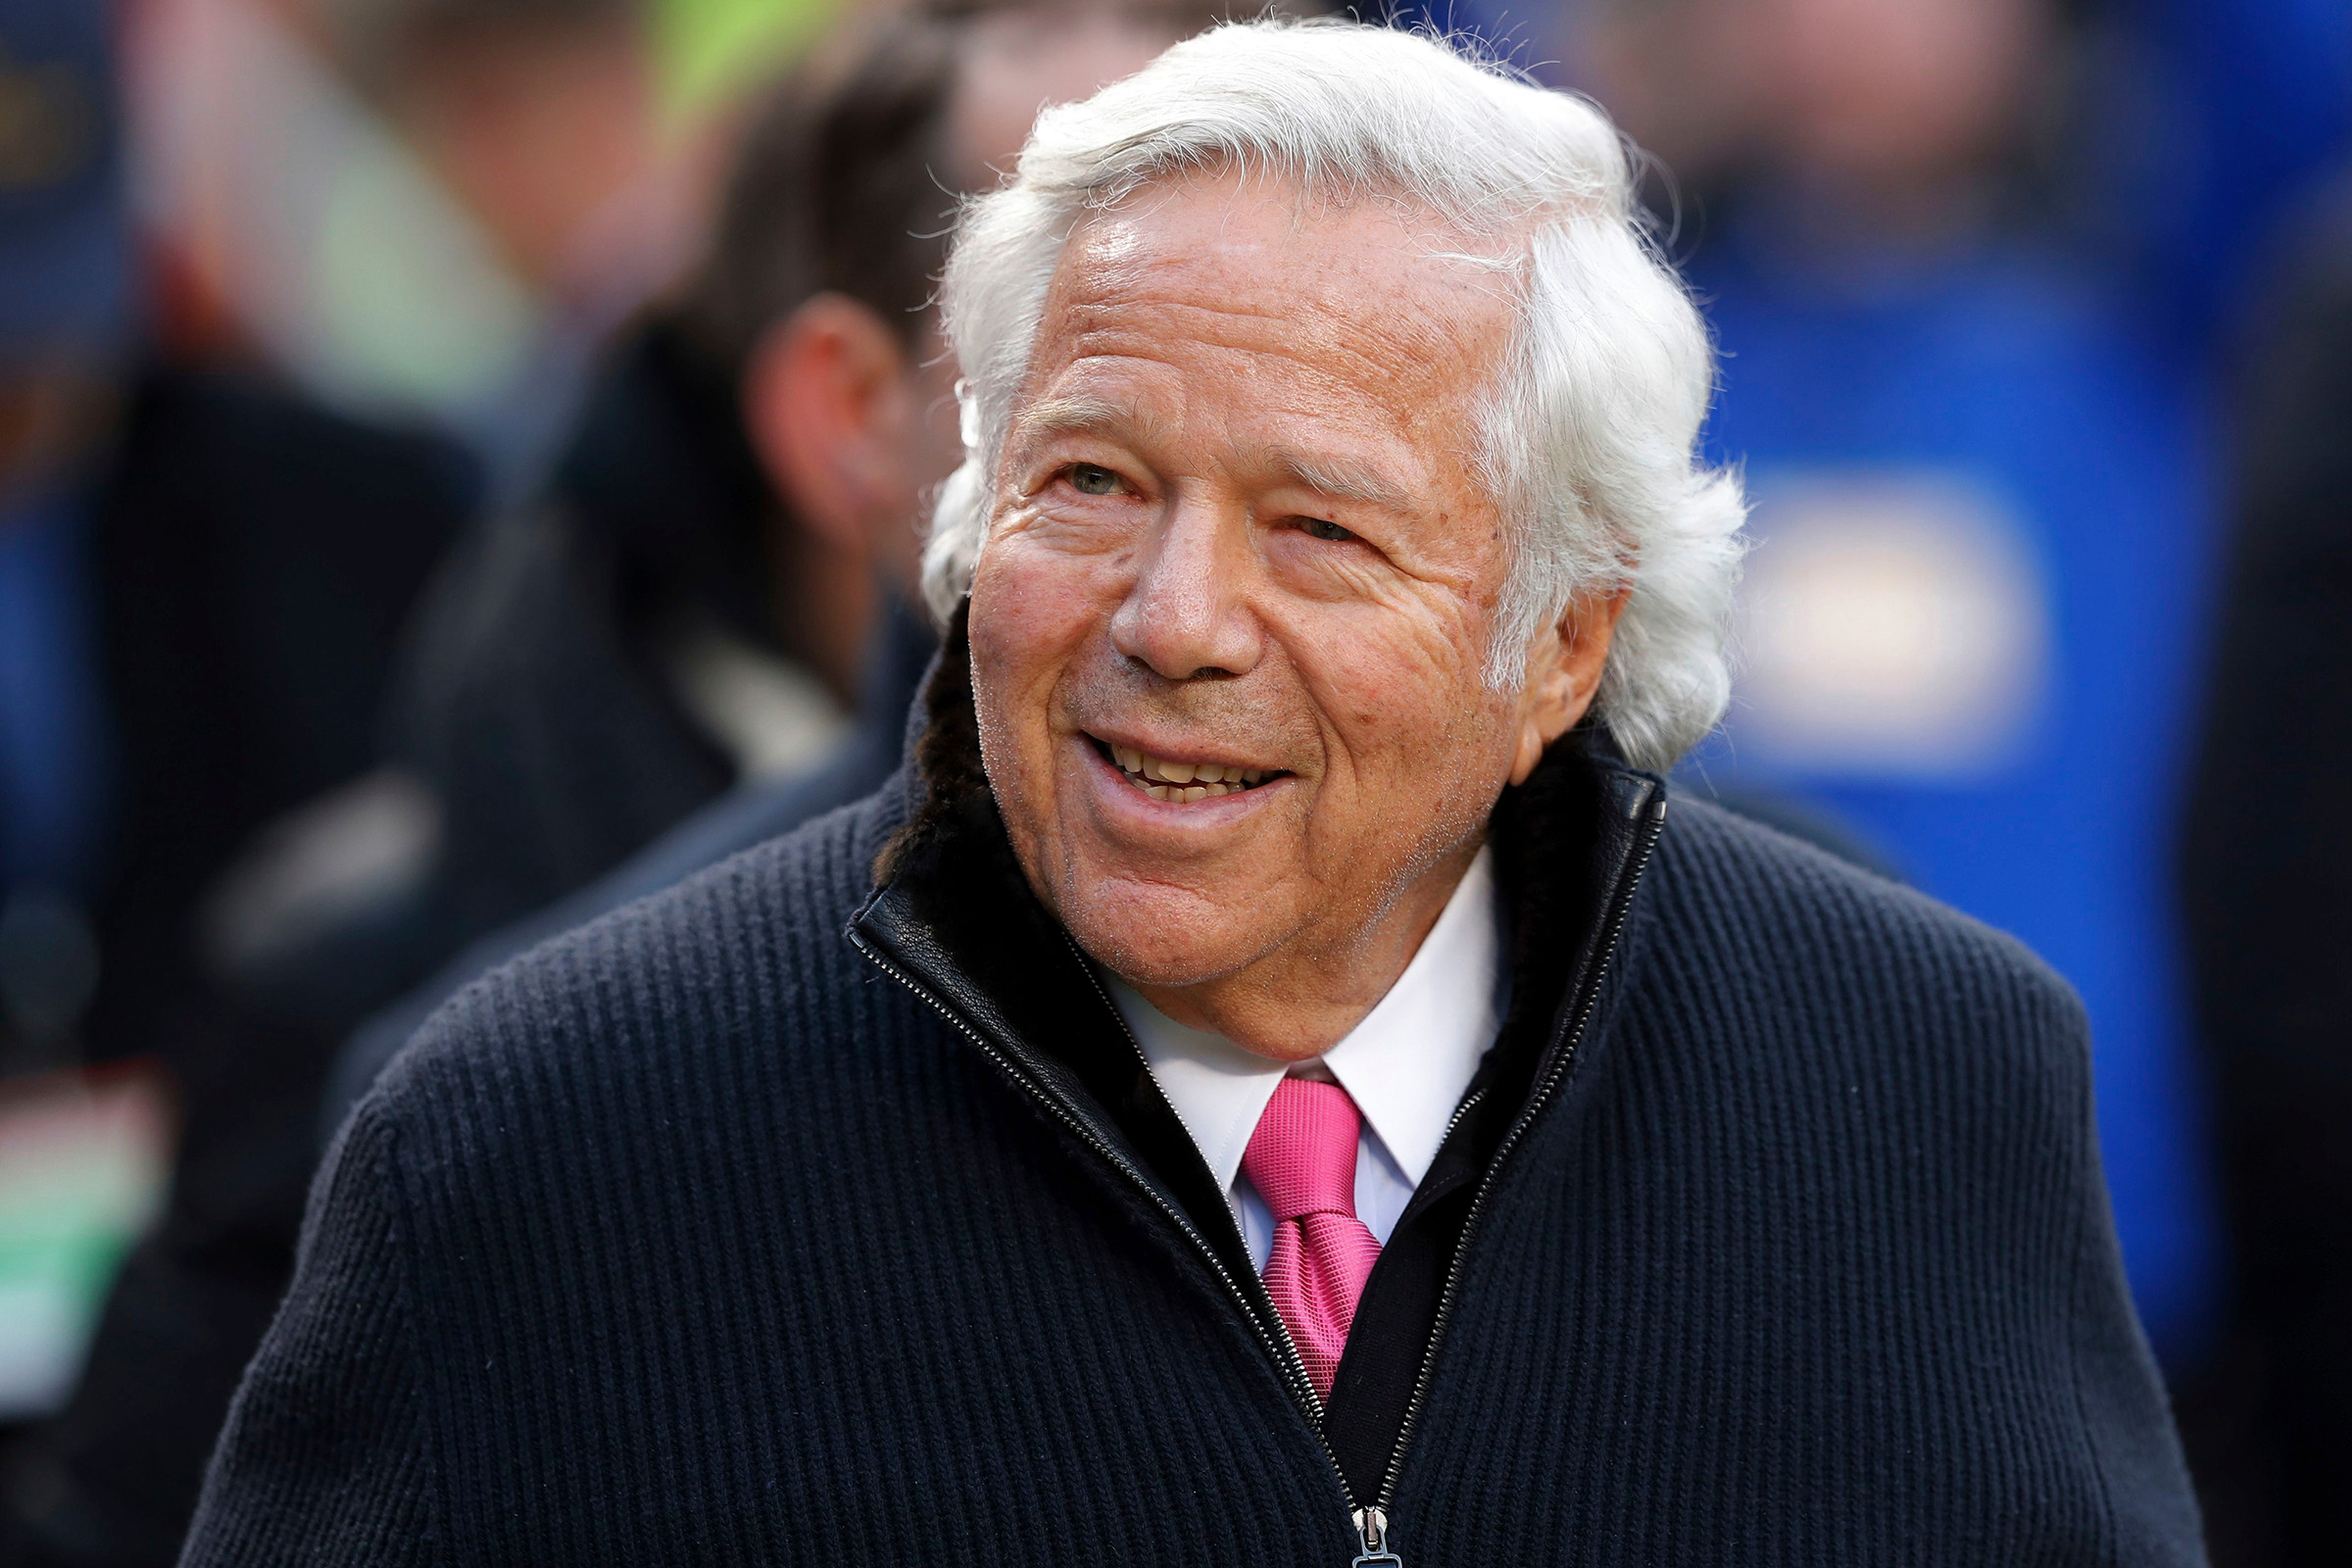 “Prosecutors Say There’s No Evidence of Sex Trafficking In Robert Kraft Case,” EJ Dickson for Rolling Stone